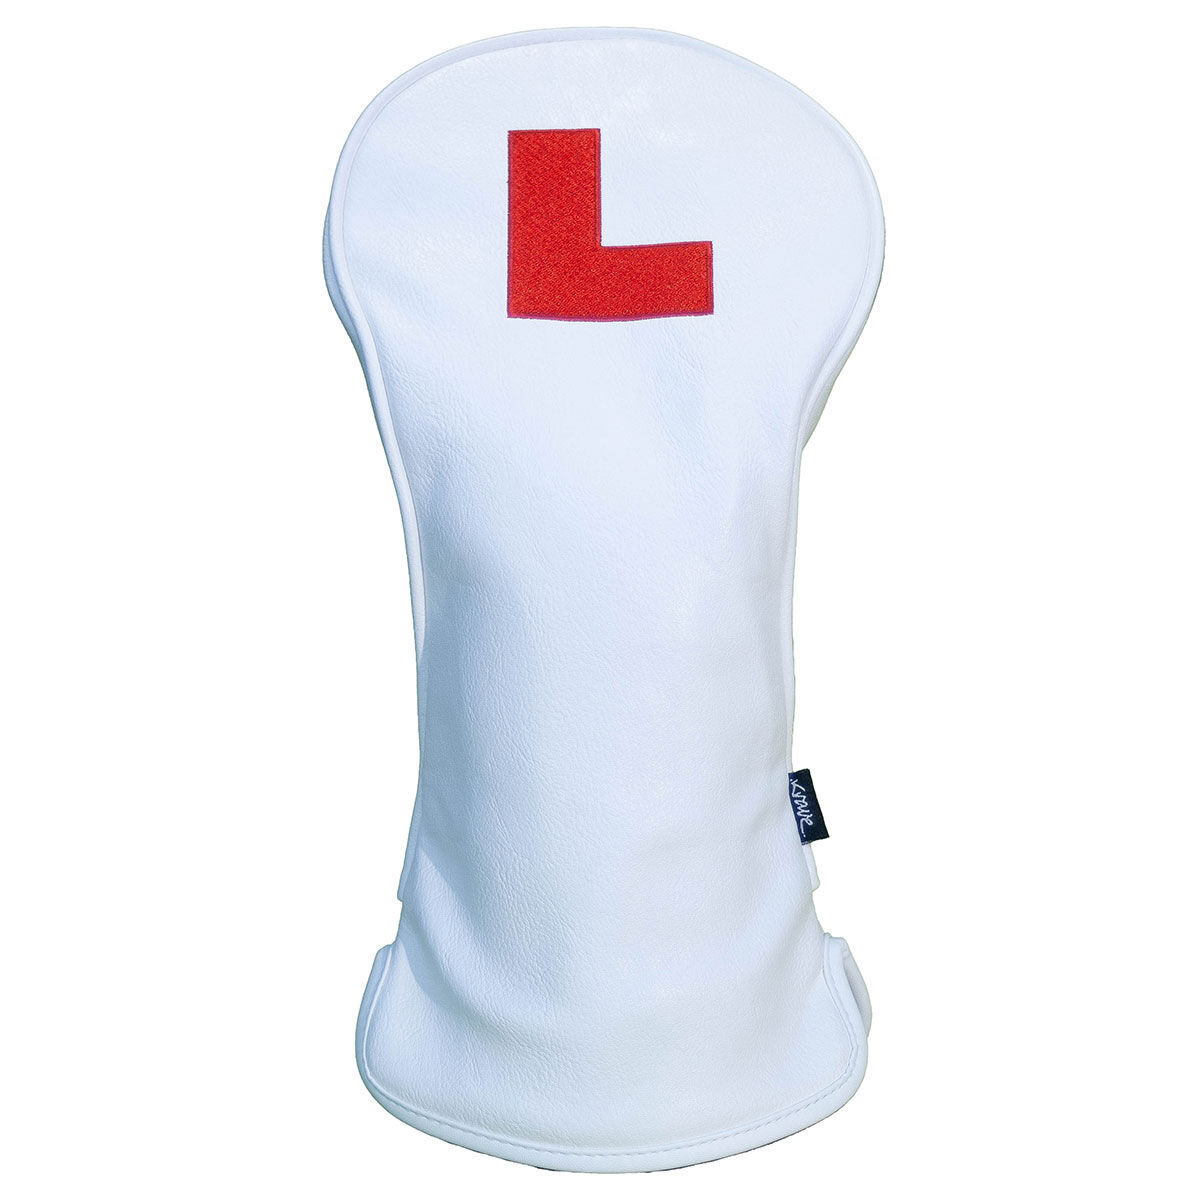 Krave Learner Golf Driver Head Cover, Mens, Driver, White/red | American Golf